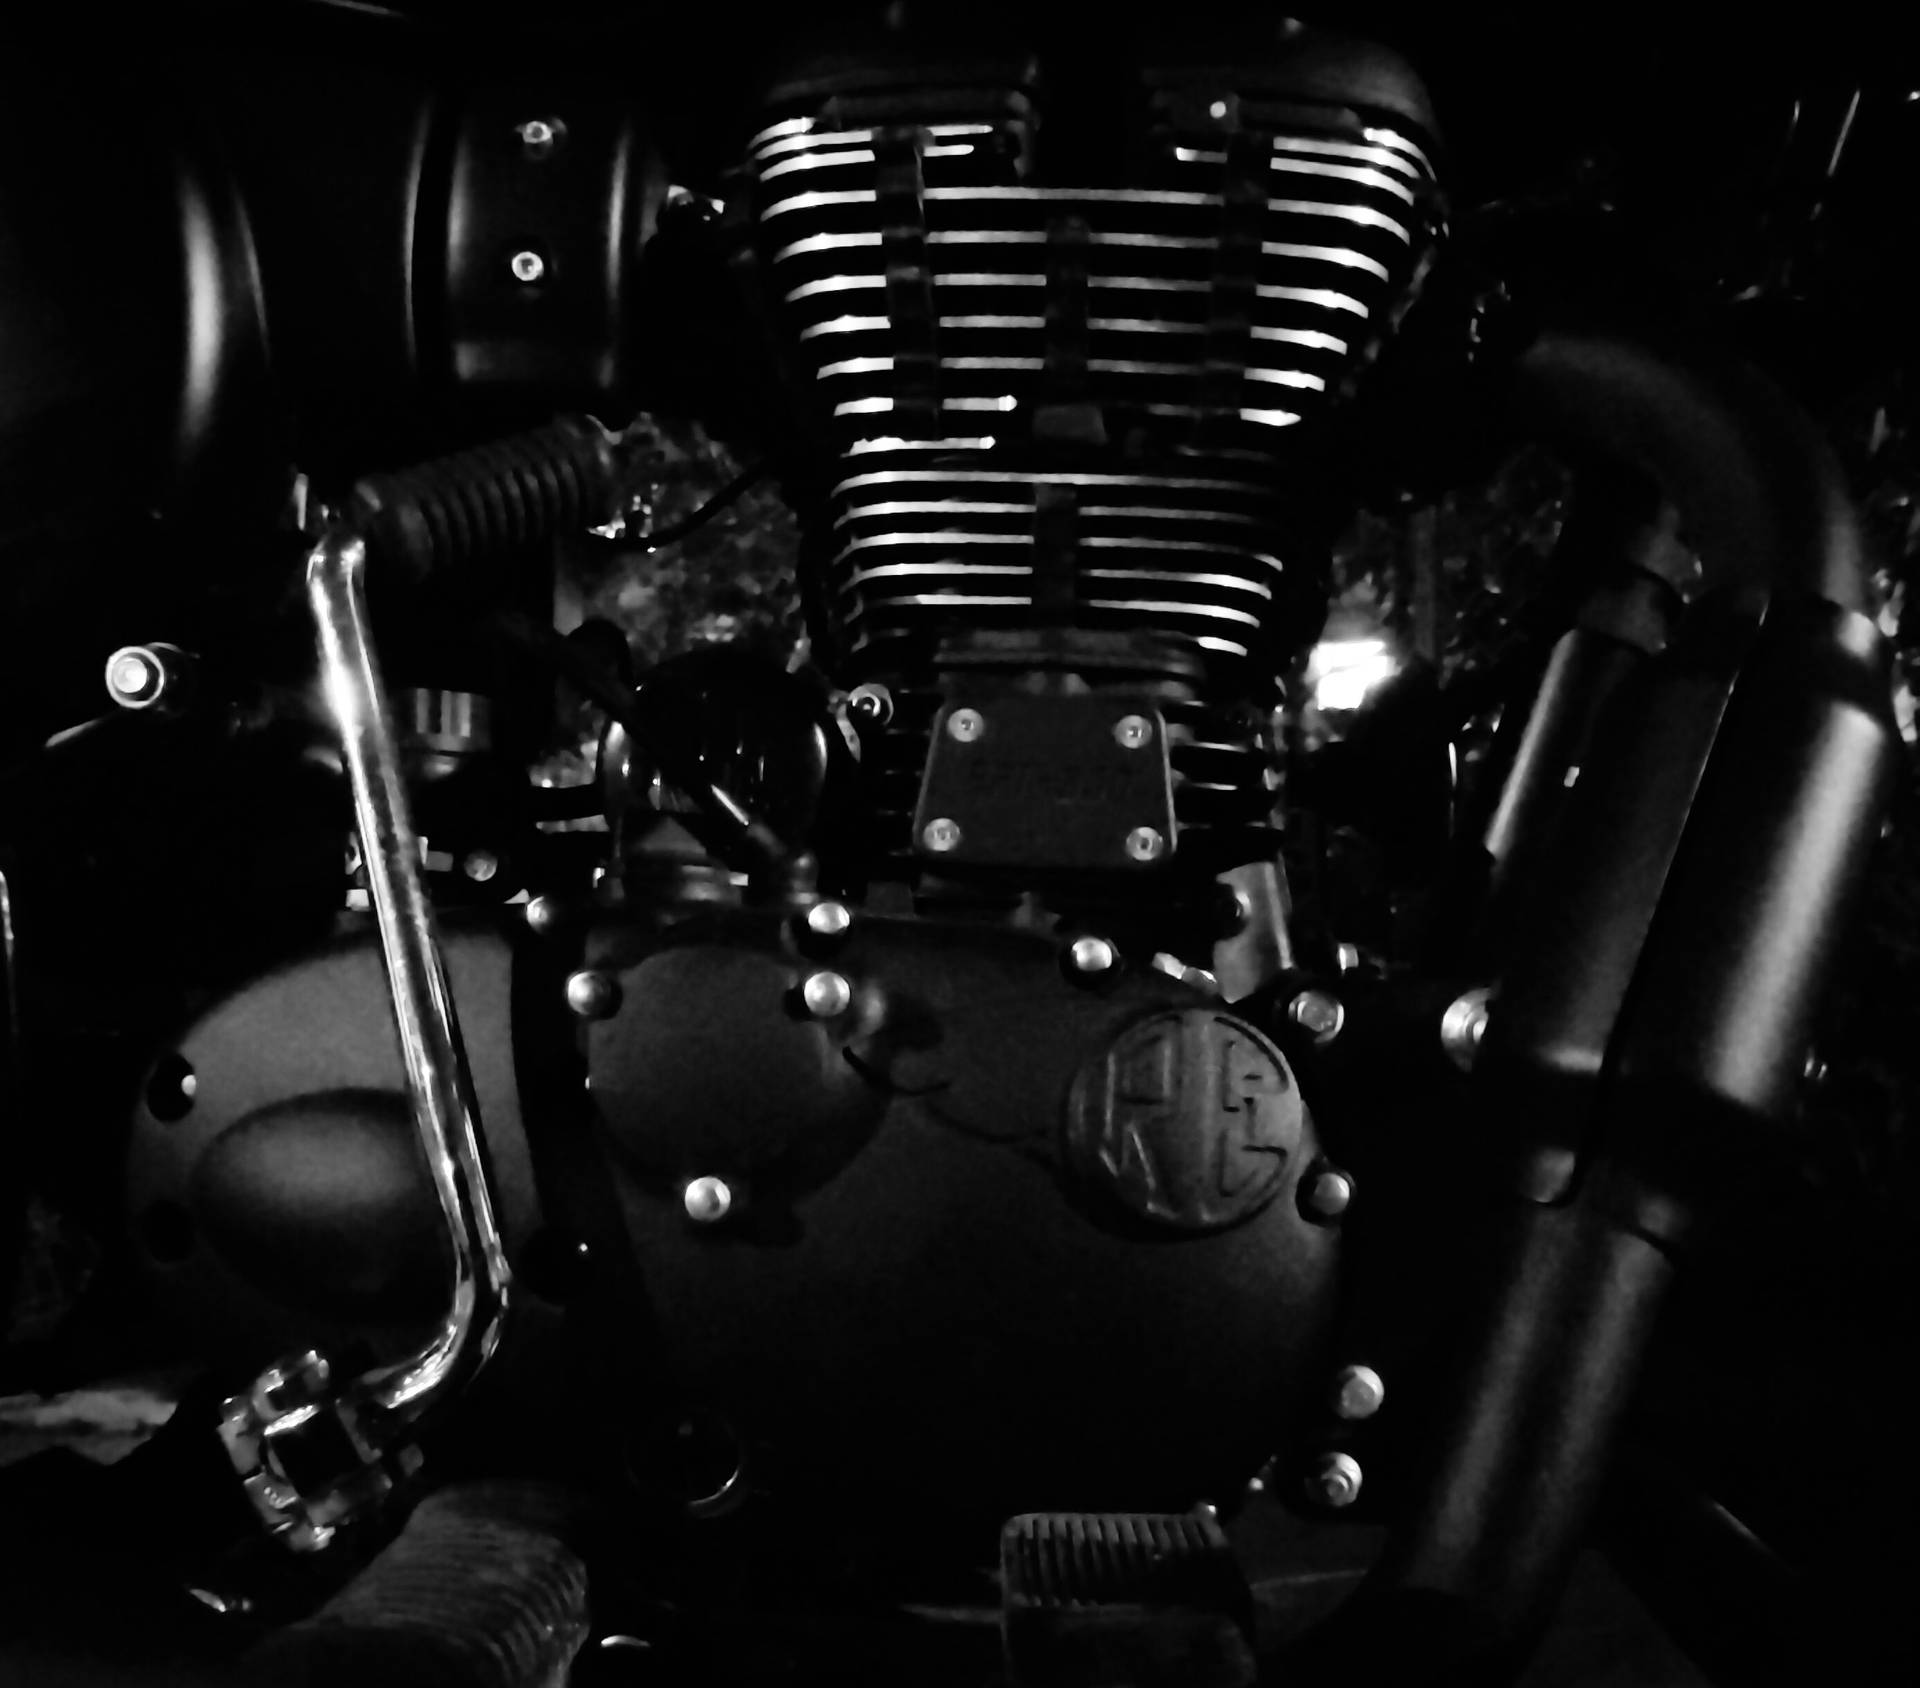 A Single Engine Motorcycle Oozing Strength And Power.